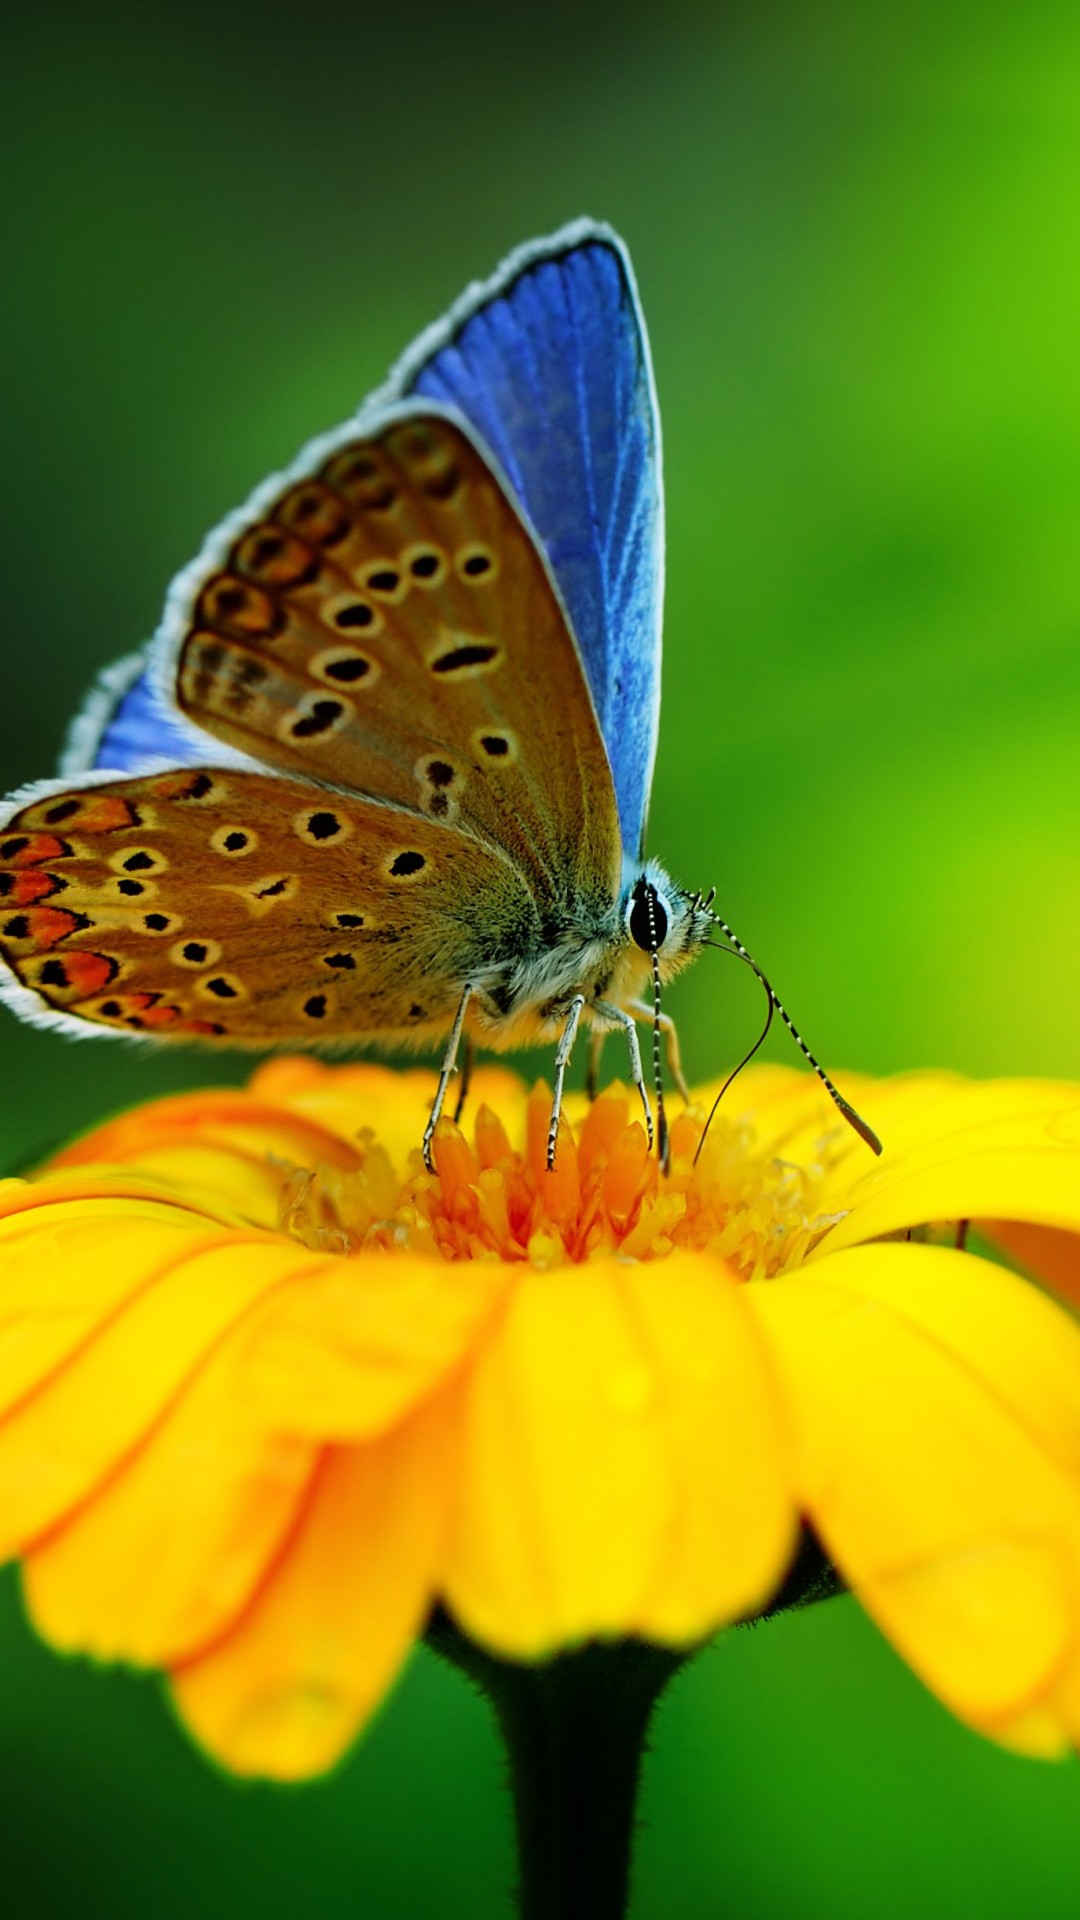 Butterfly Collecting Pollen Wallpaper for SAMSUNG Galaxy S4